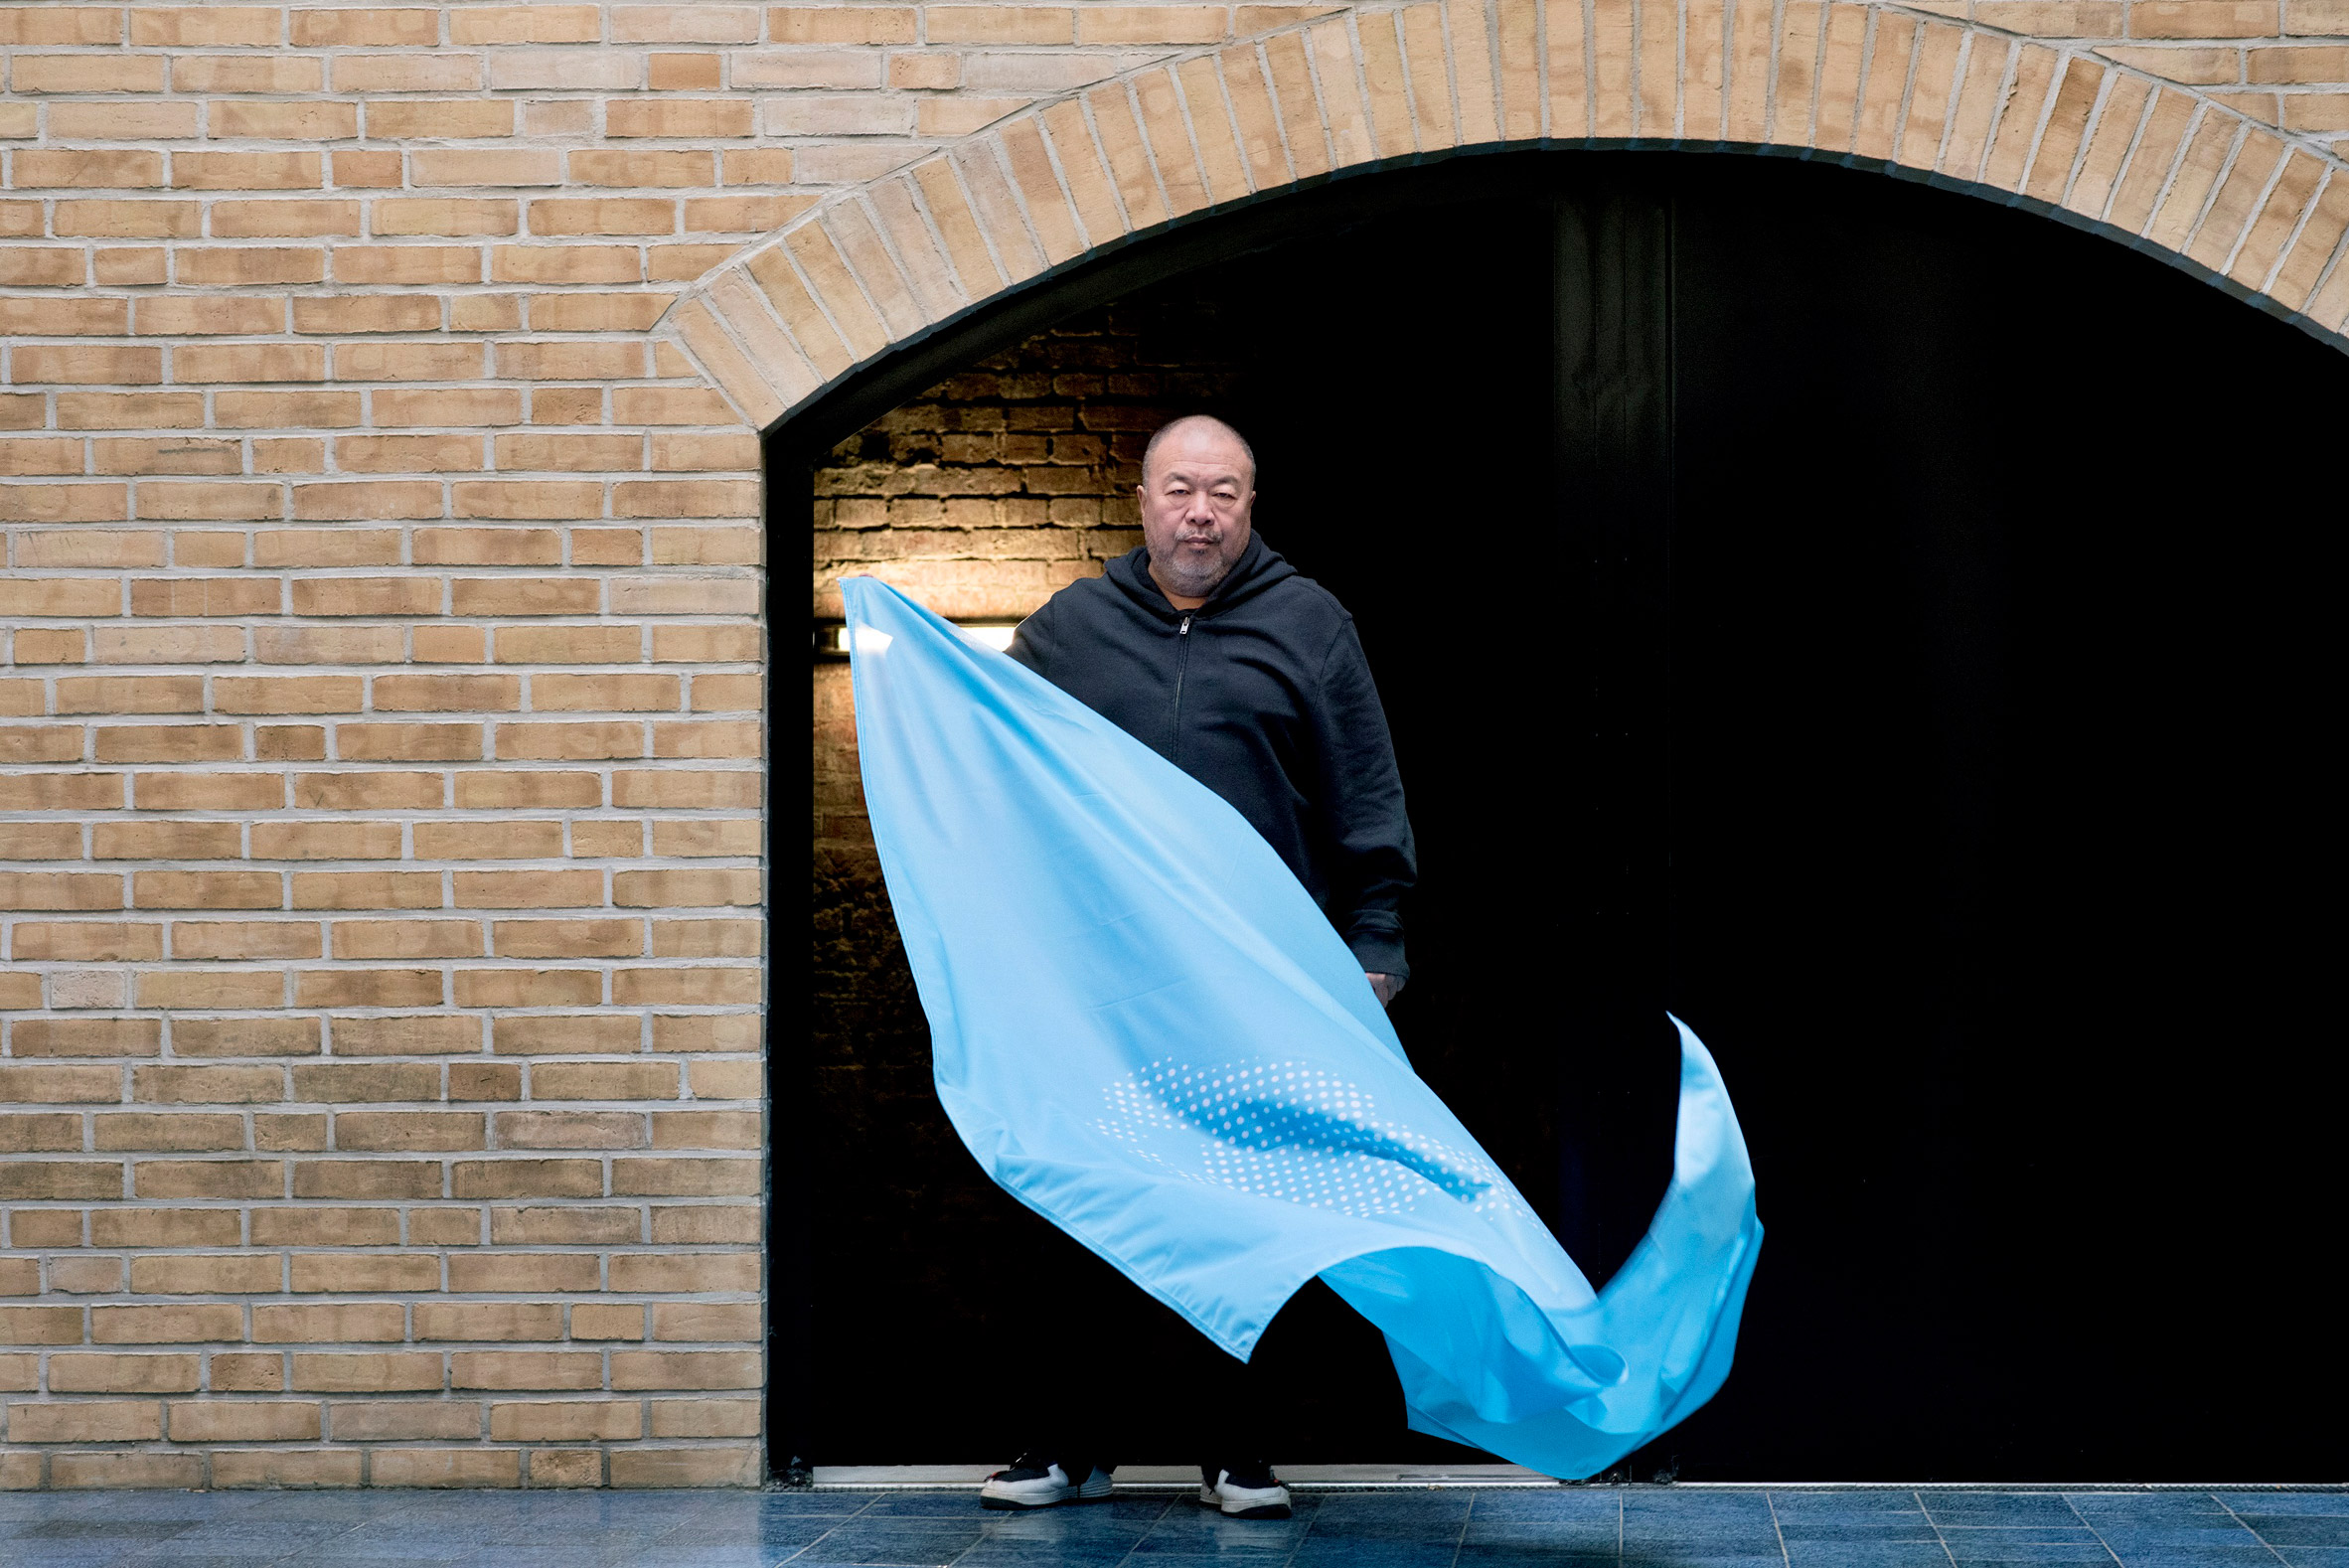 Ai Weiwei flag encourages people to think about human rights